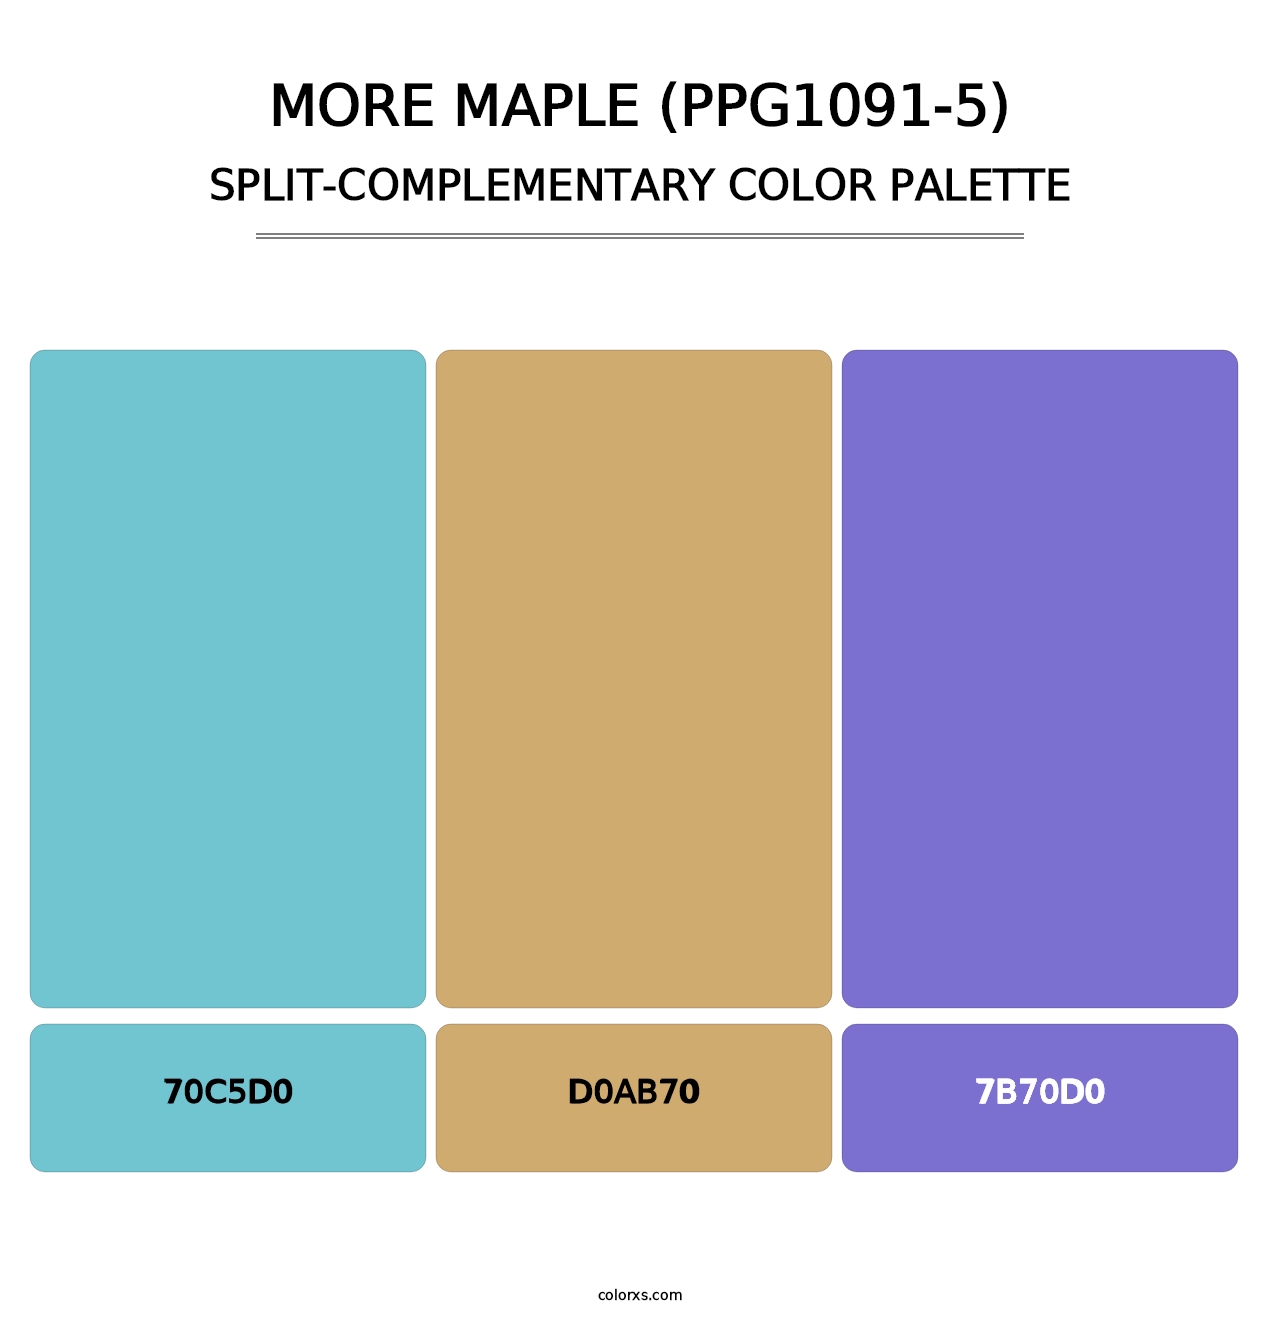 More Maple (PPG1091-5) - Split-Complementary Color Palette